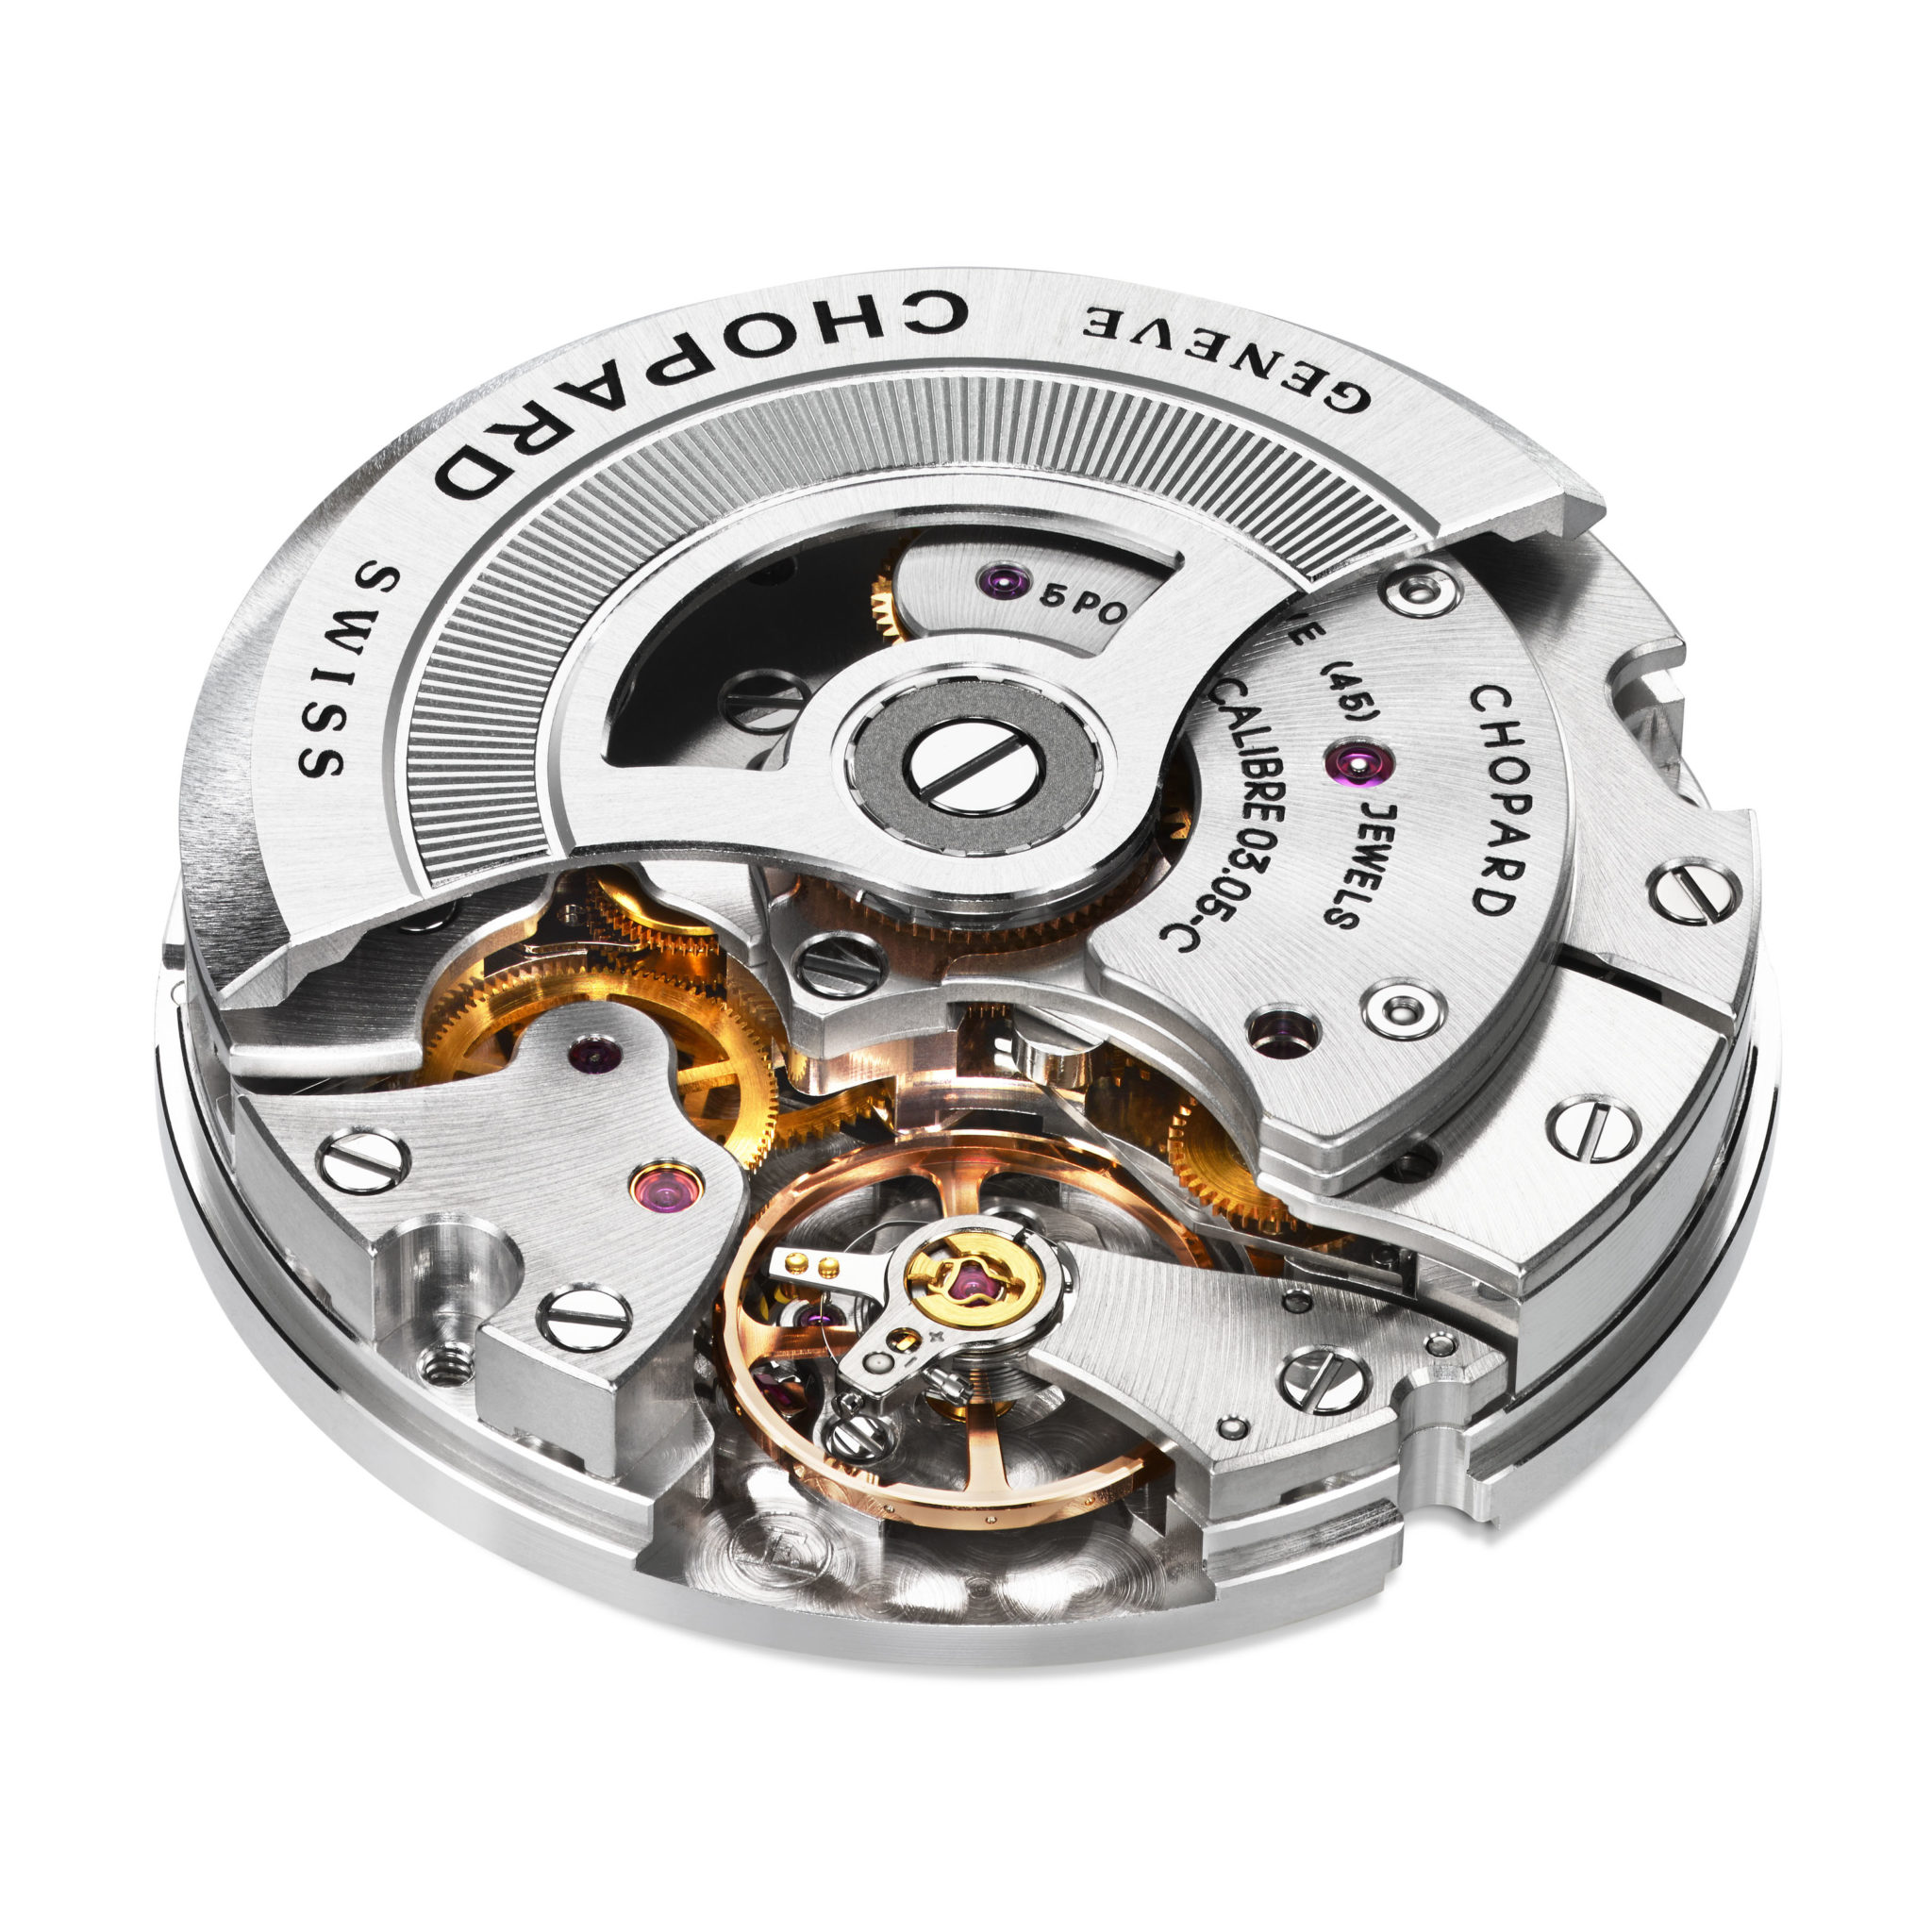 Chopard's Alpine Eagle Collection Spreads Its Wings